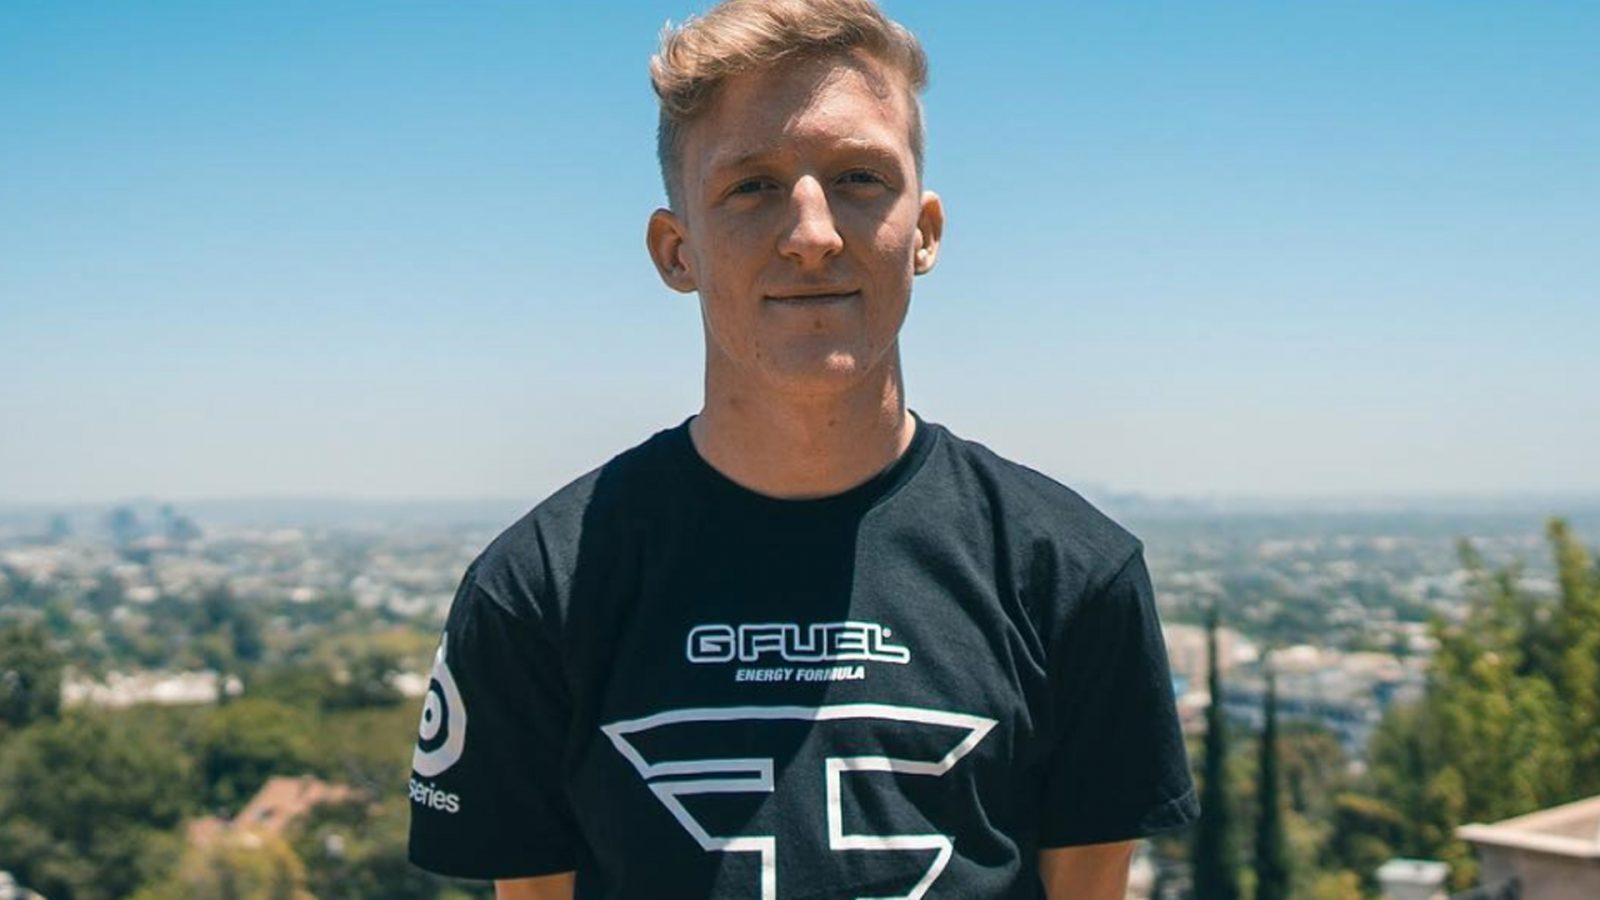 Tfue is accusing FaZe Clan of "allegedly limiting his ability to pursue his profession in violation of California law" as well as other criteria.